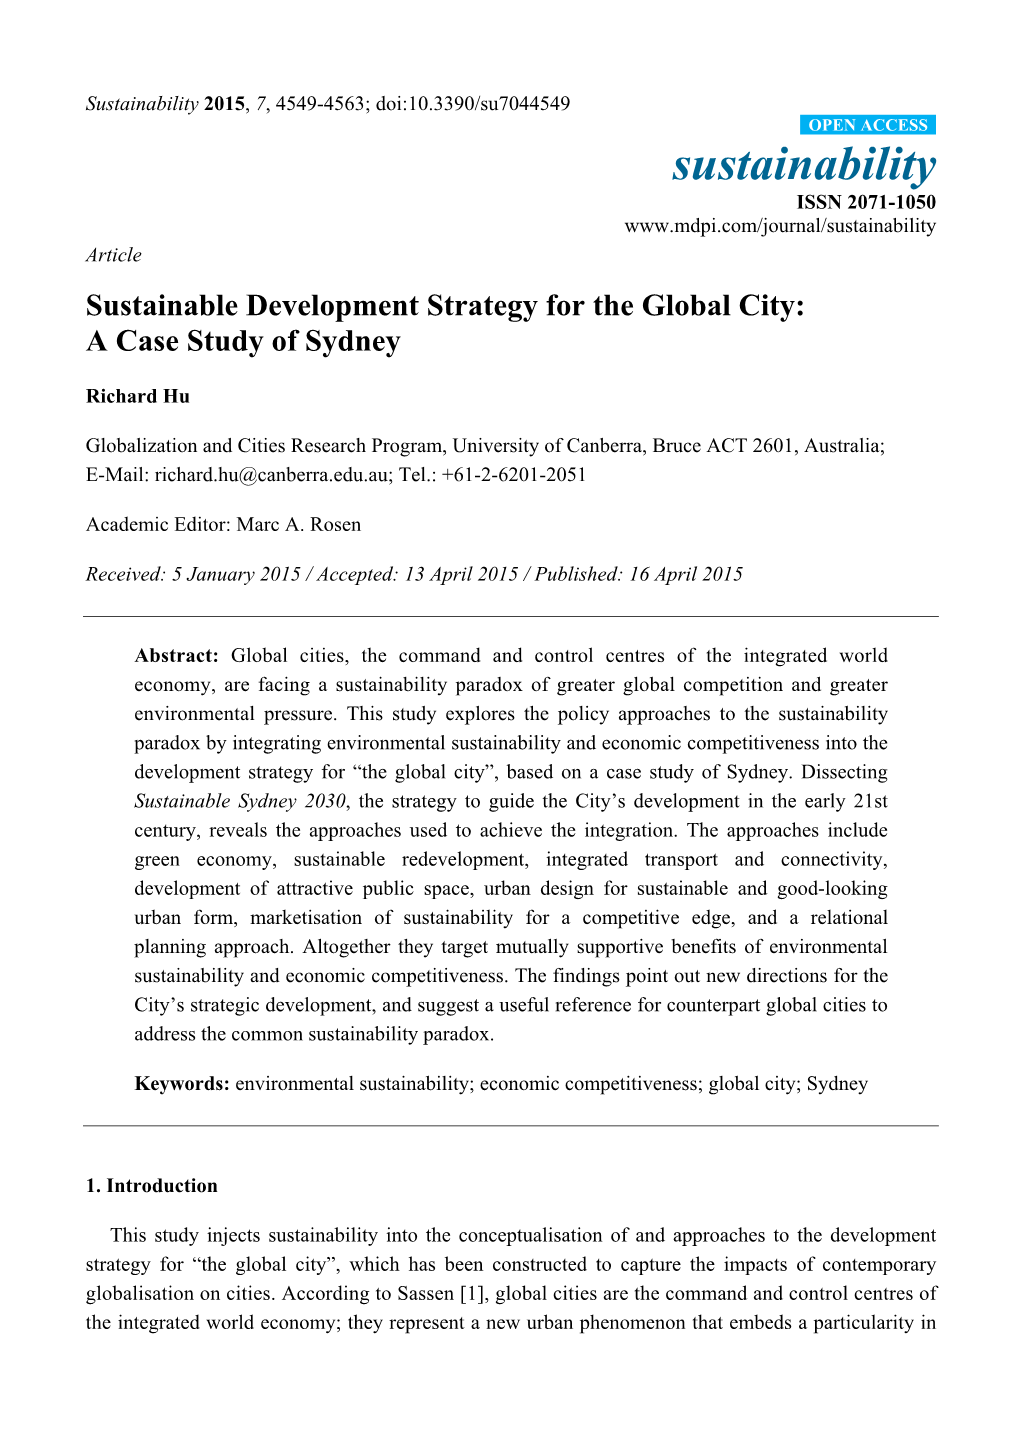 Sustainable Development Strategy for the Global City: a Case Study of Sydney